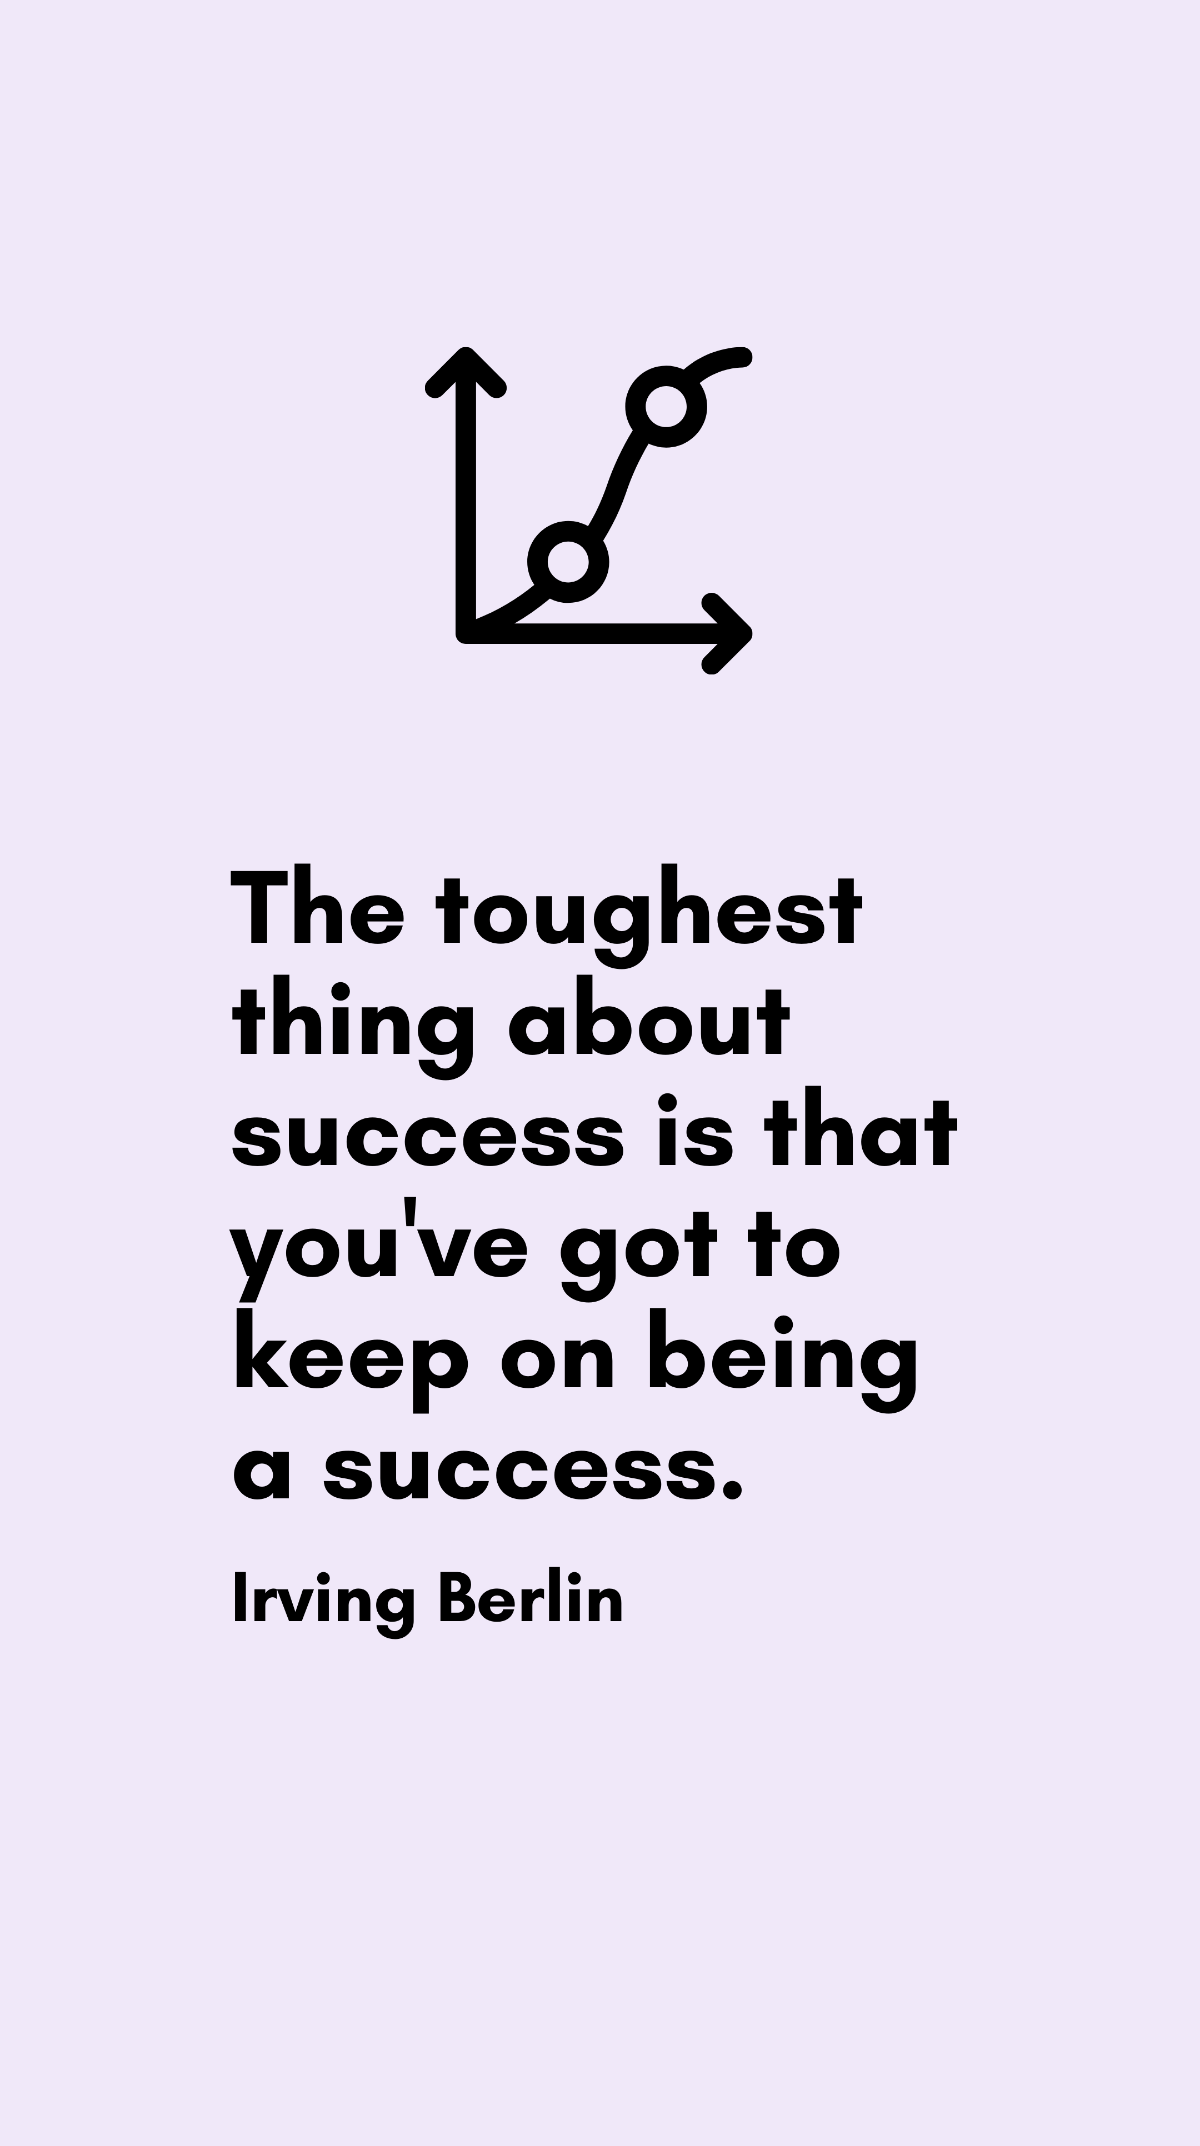 Free Irving Berlin - The toughest thing about success is that you've got to keep on being a success. Template